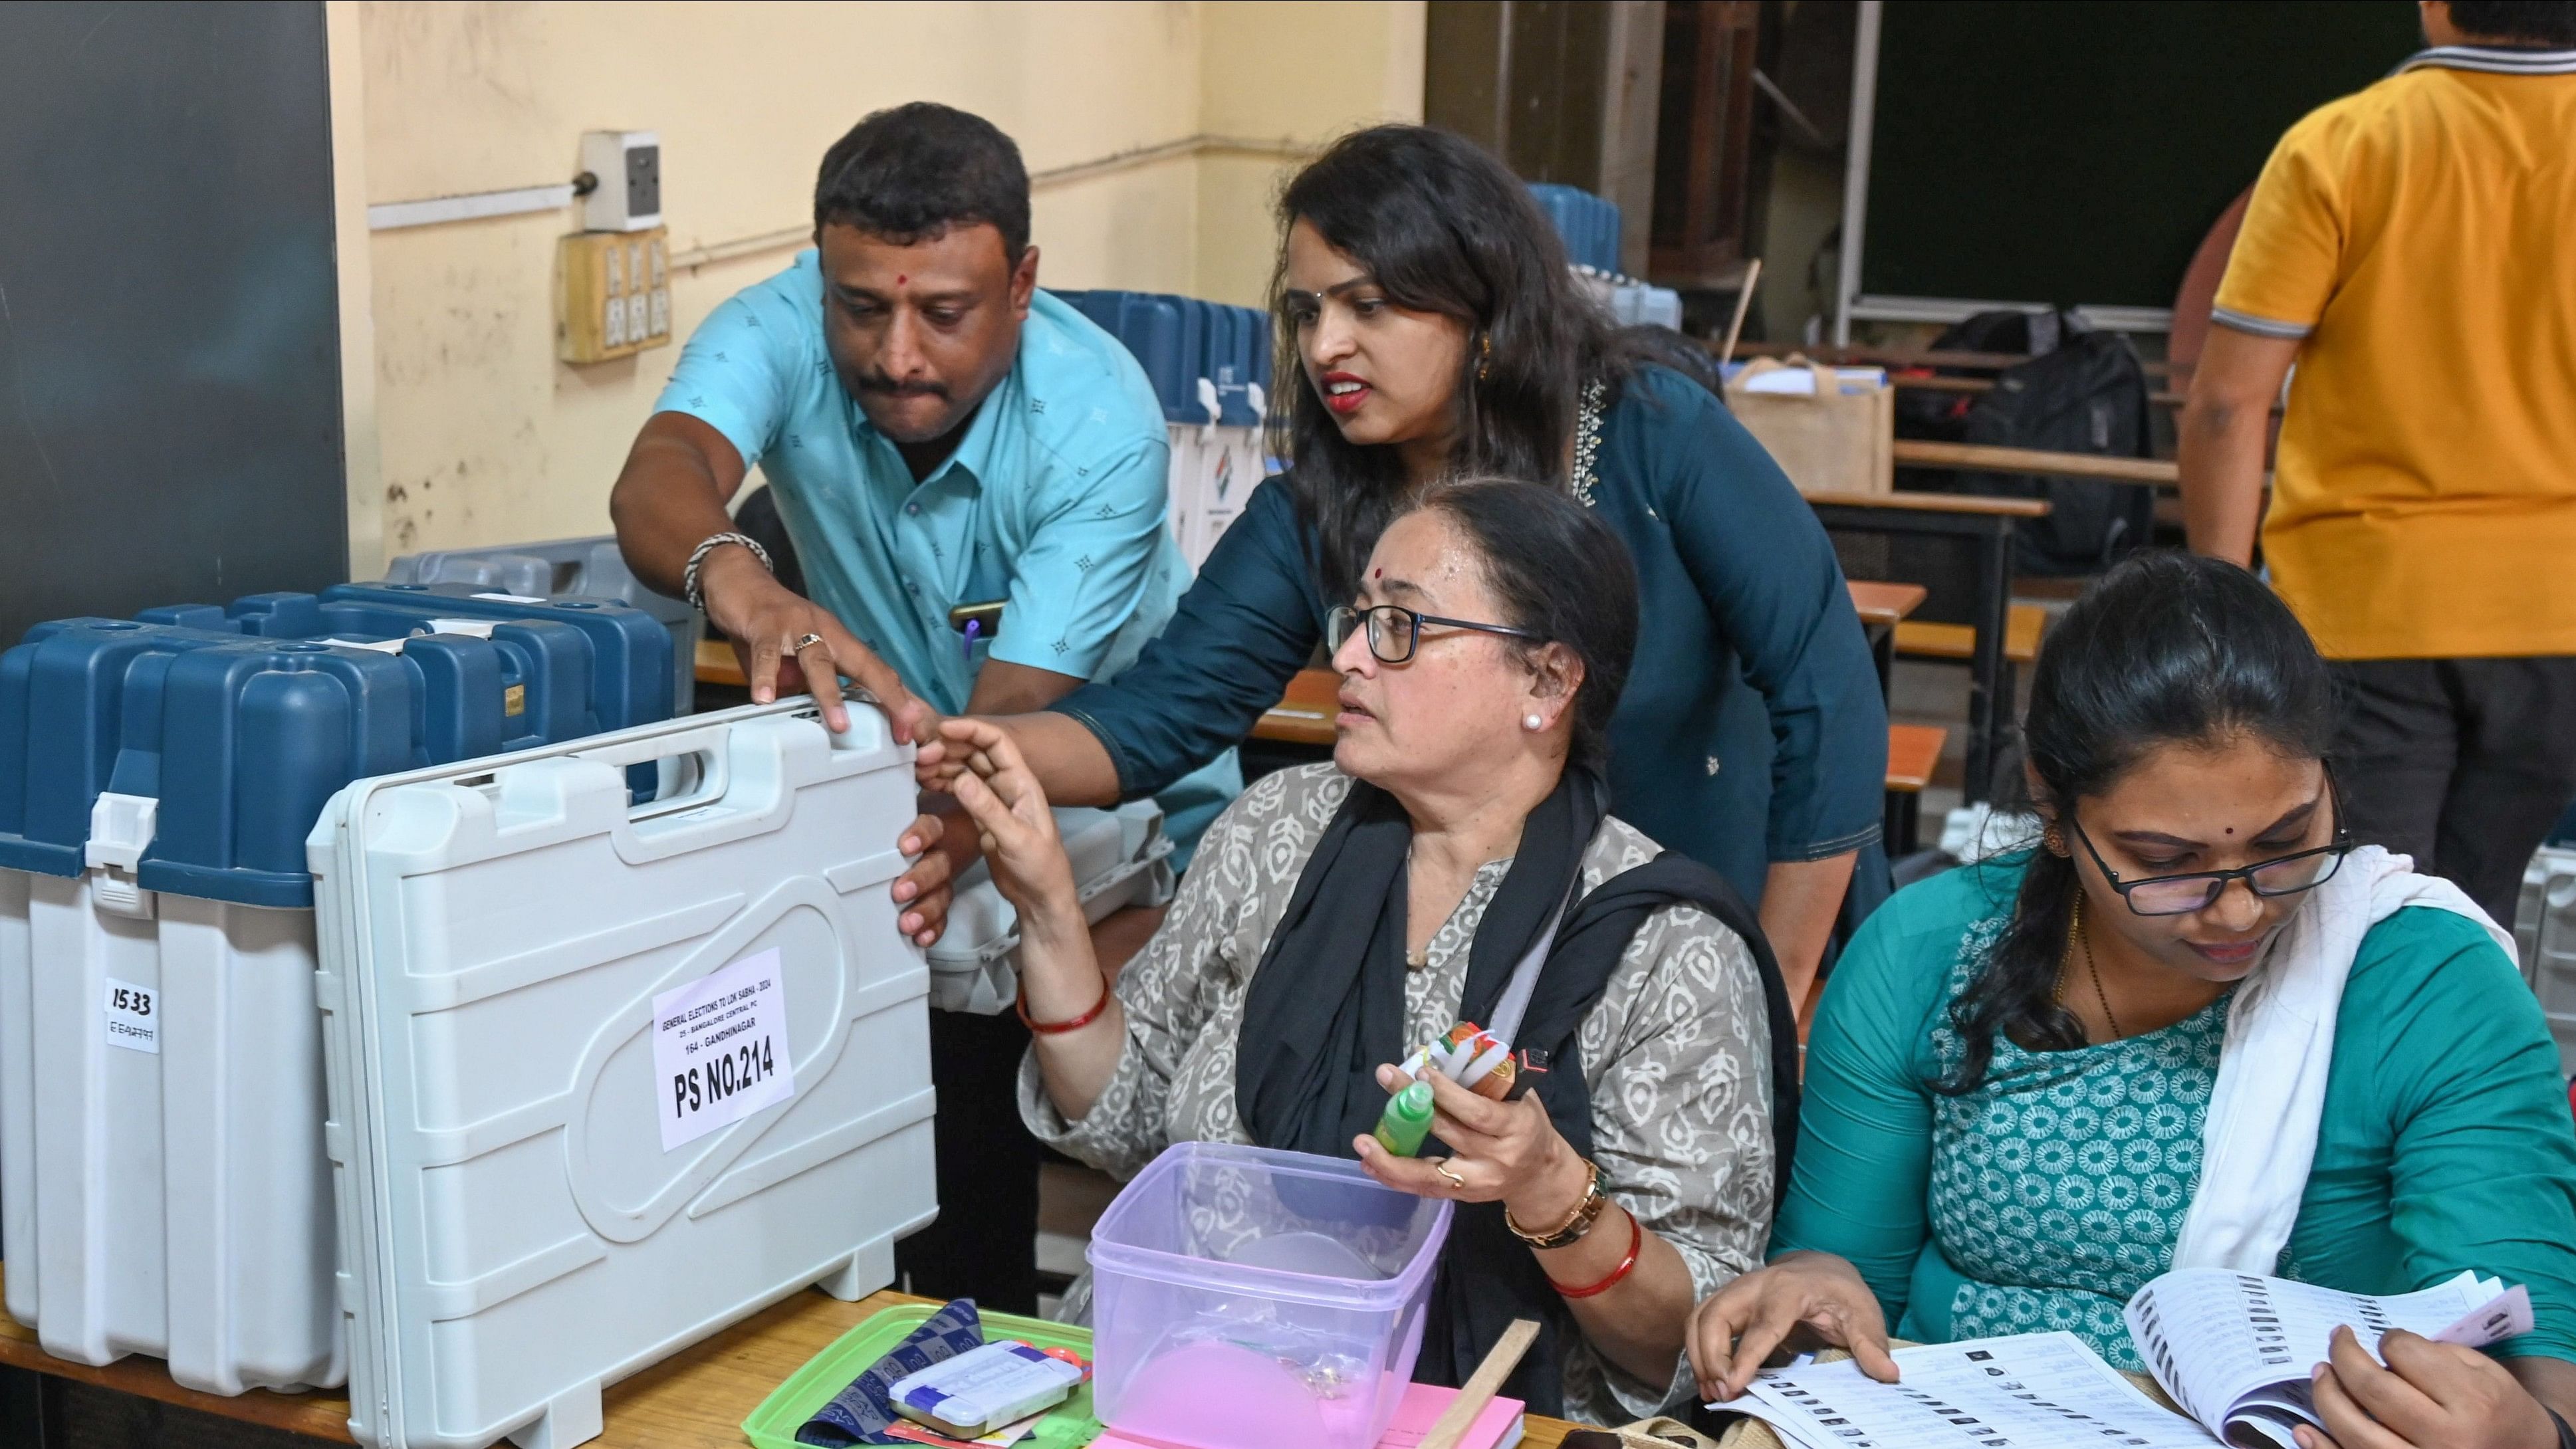 Polling officials inspect election materials at the mustering centre in Bengaluru on Thursday. DH PHOTO/S K Dinesh &amp; B K Janardhan